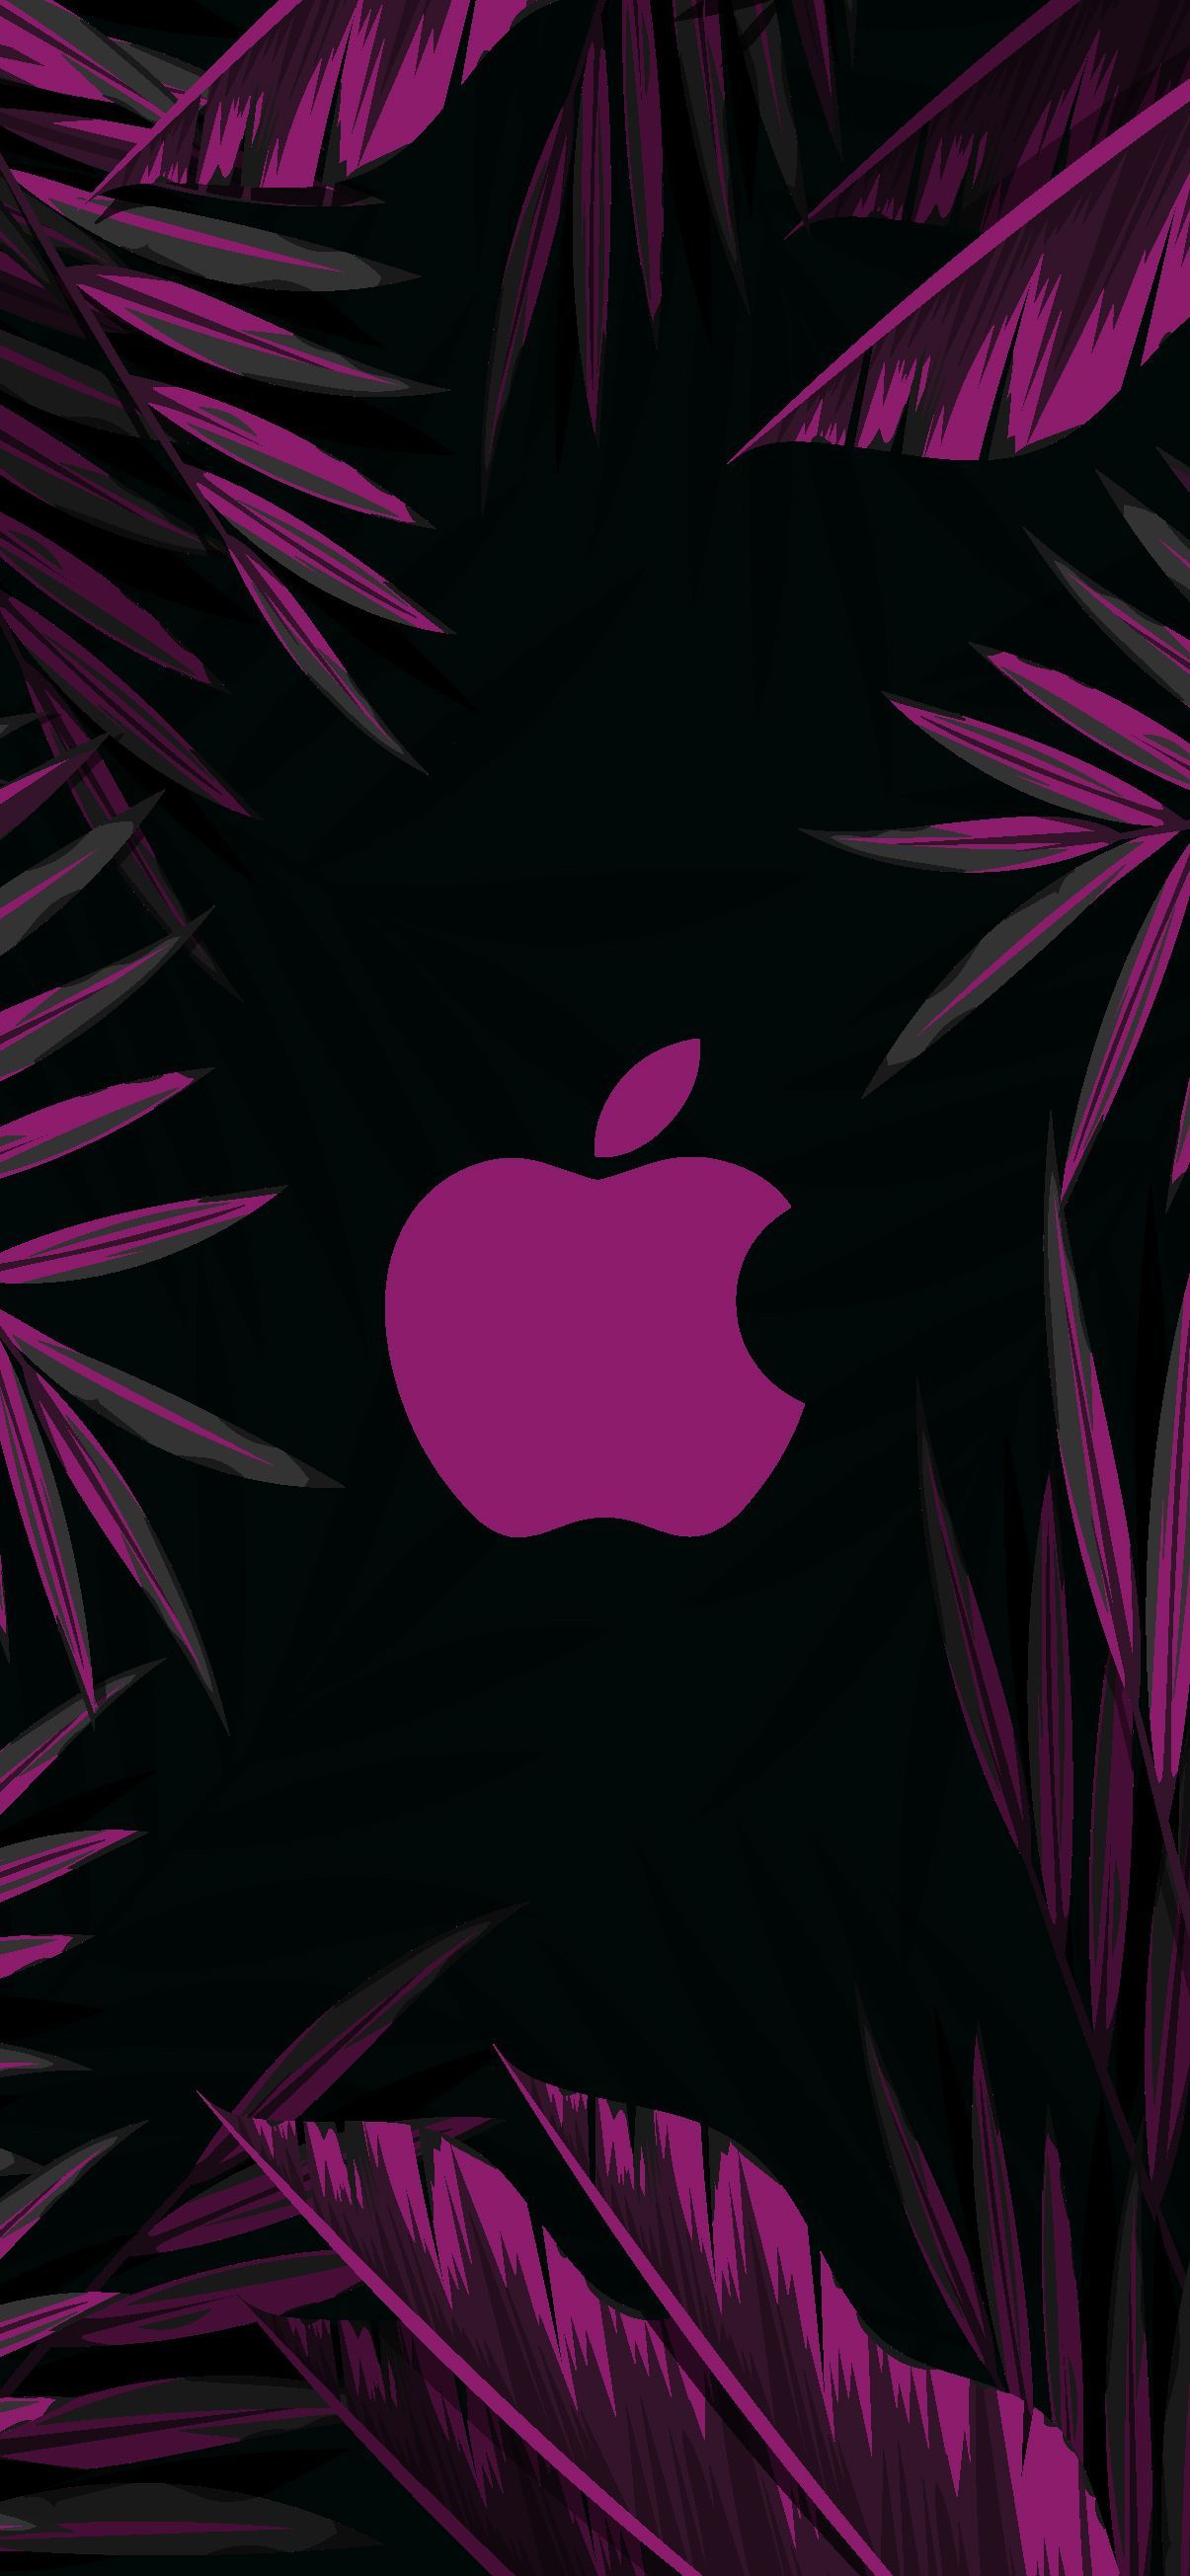 IPhone wallpaper with the Apple logo surrounded by purple leaves - Jungle, neon purple, dark, September, Nike